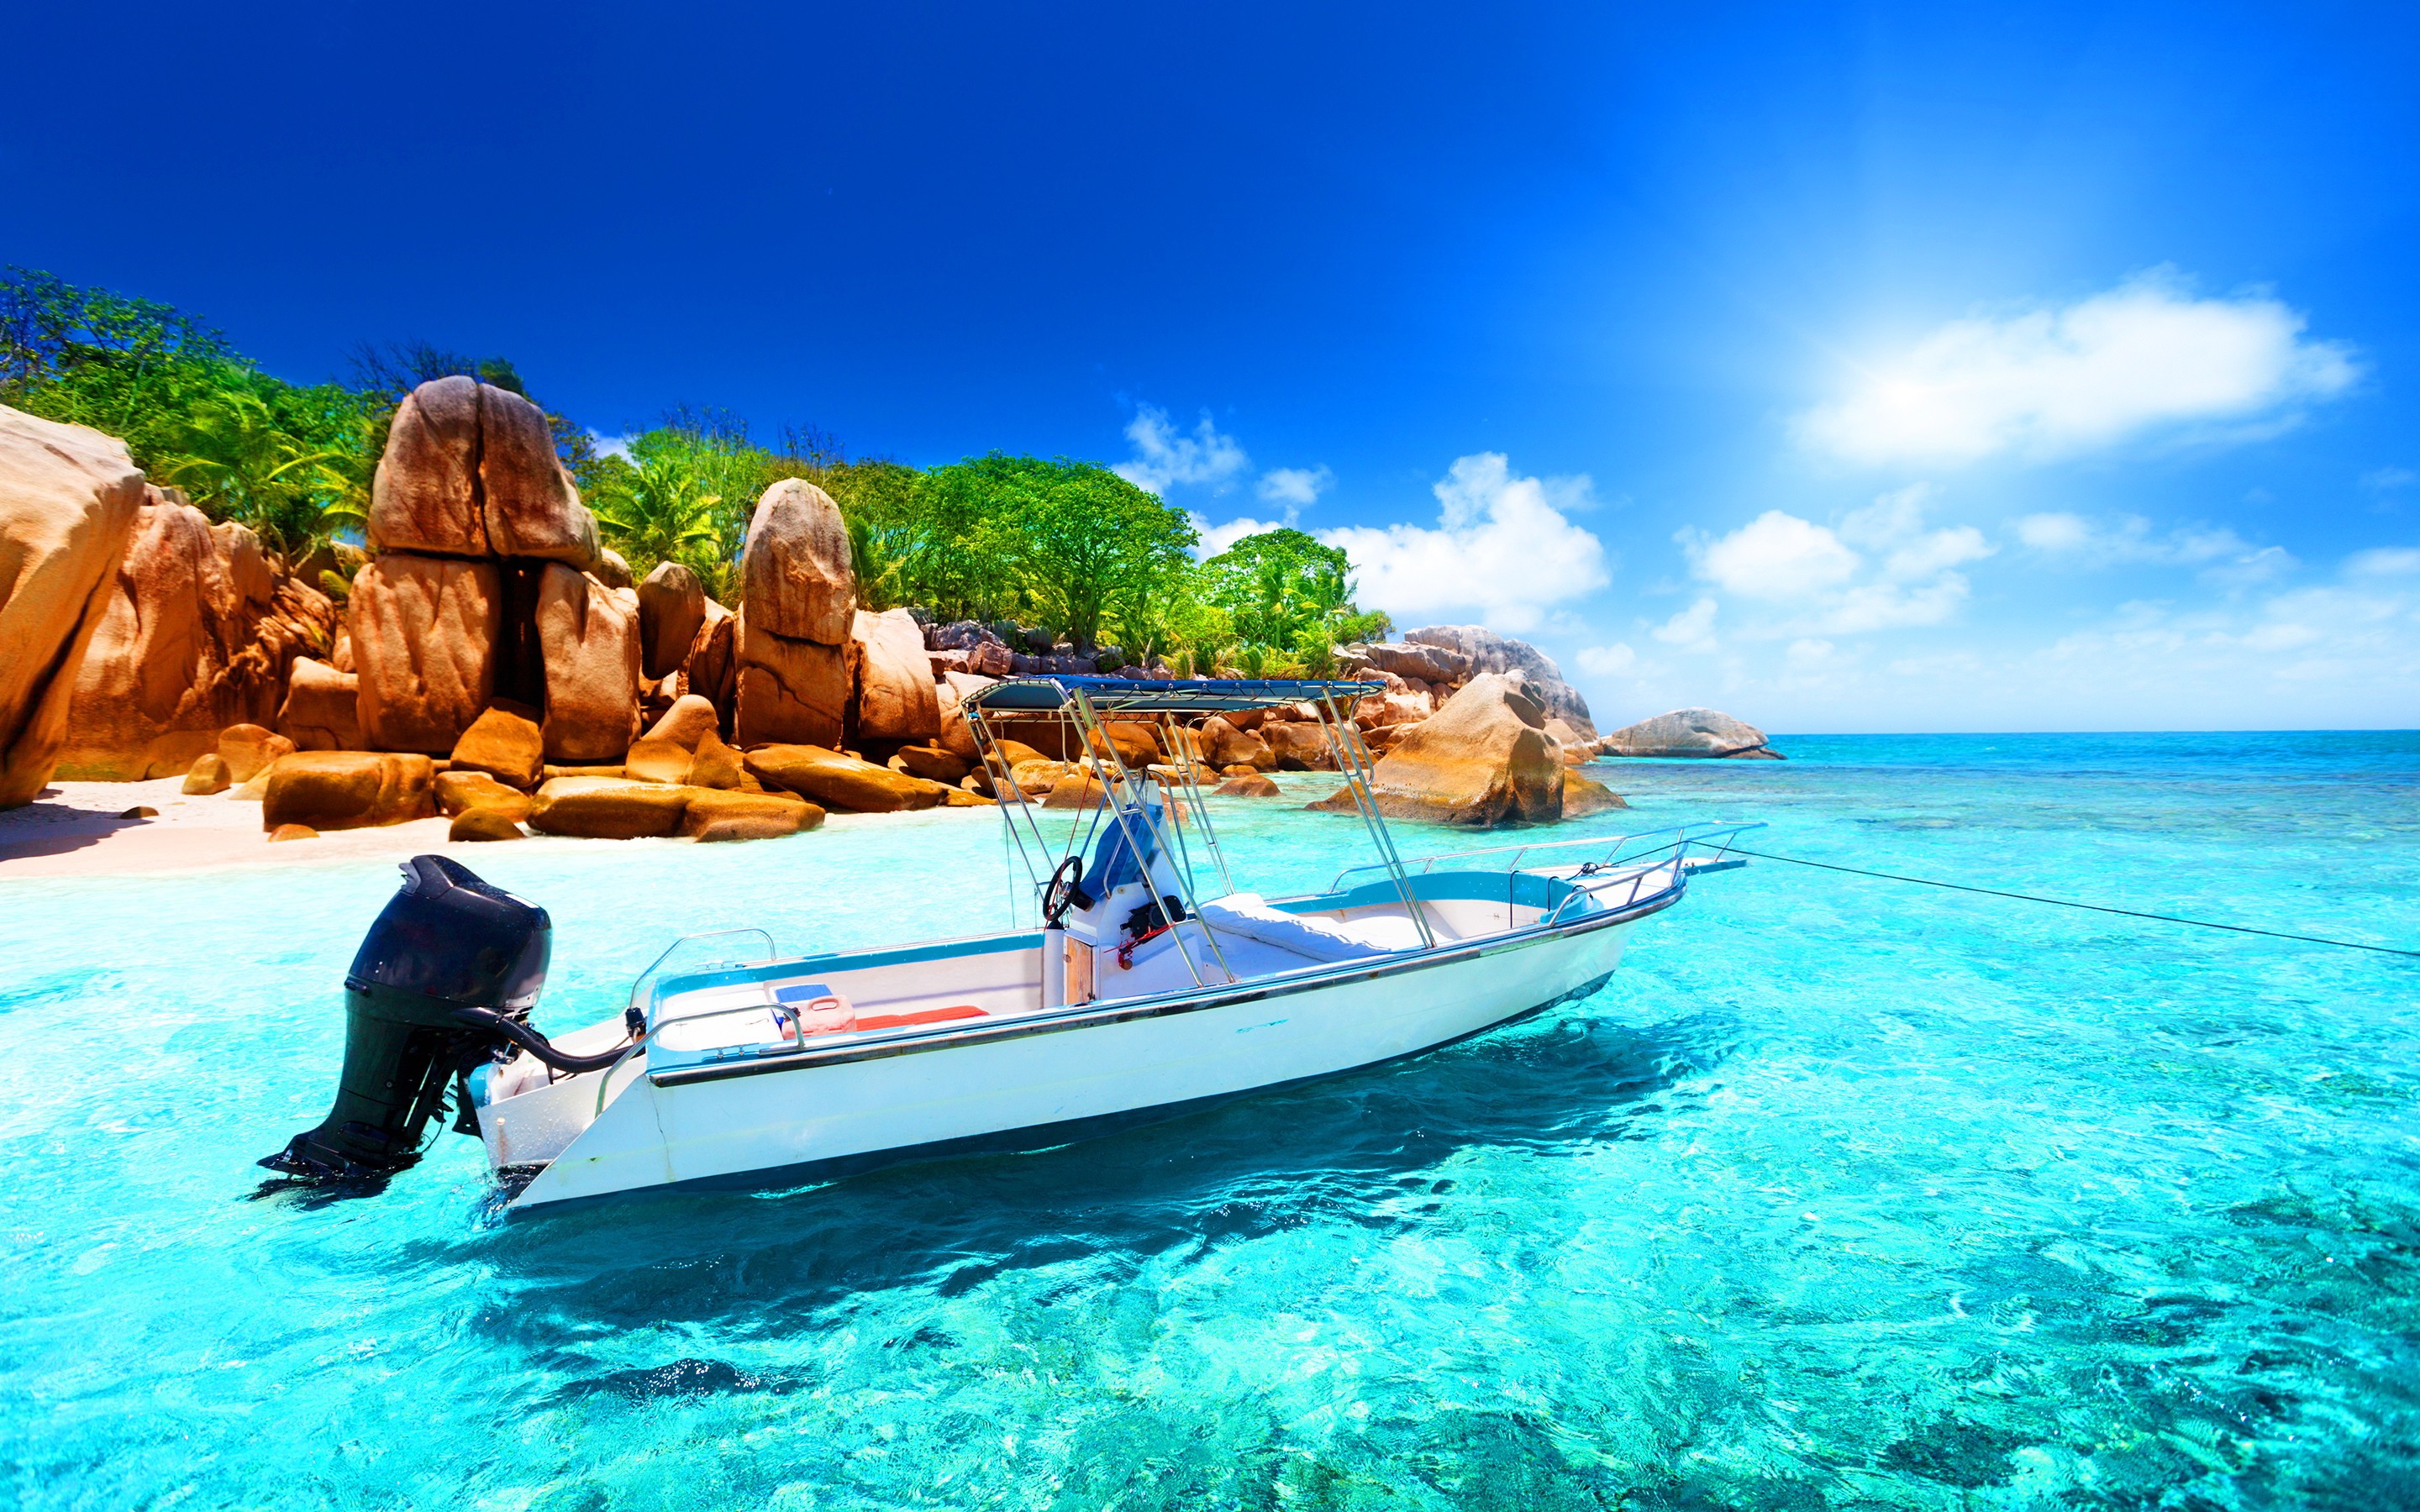 General 2880x1800 Seychelles boat sea nature vehicle outdoors water